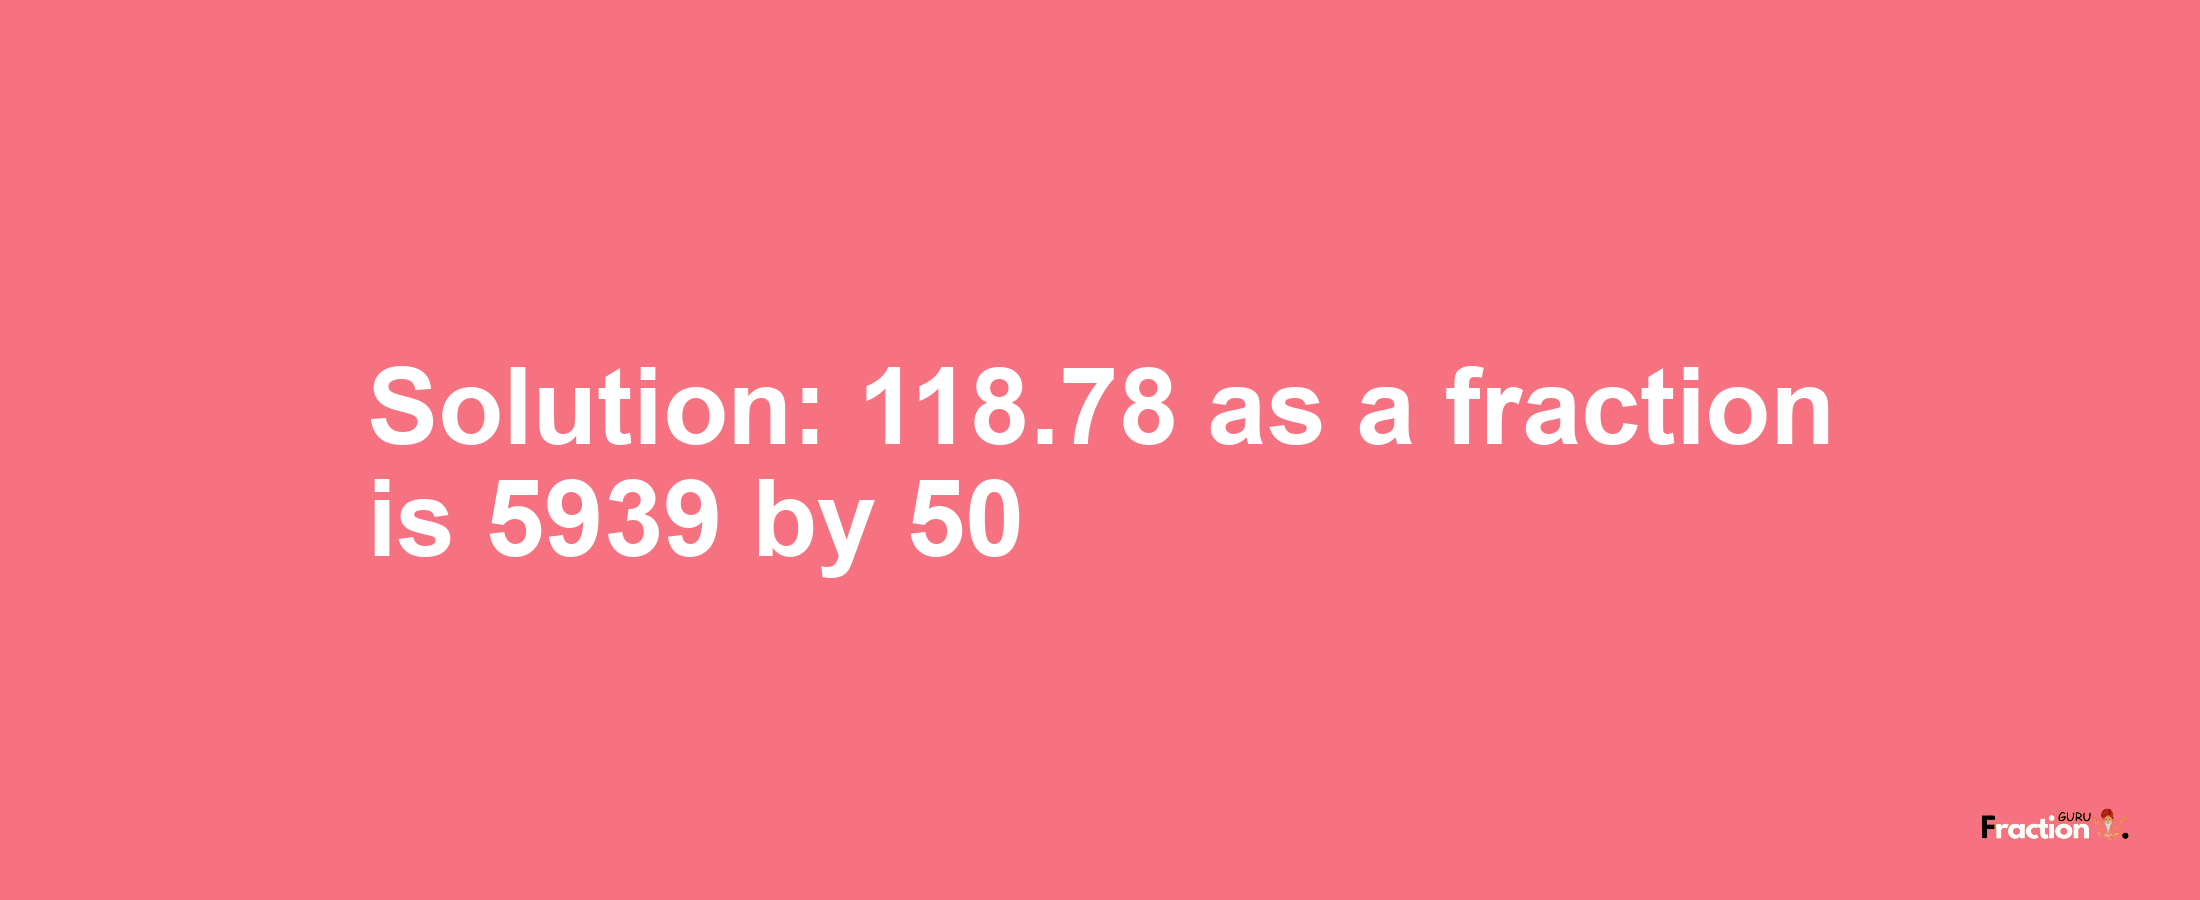 Solution:118.78 as a fraction is 5939/50